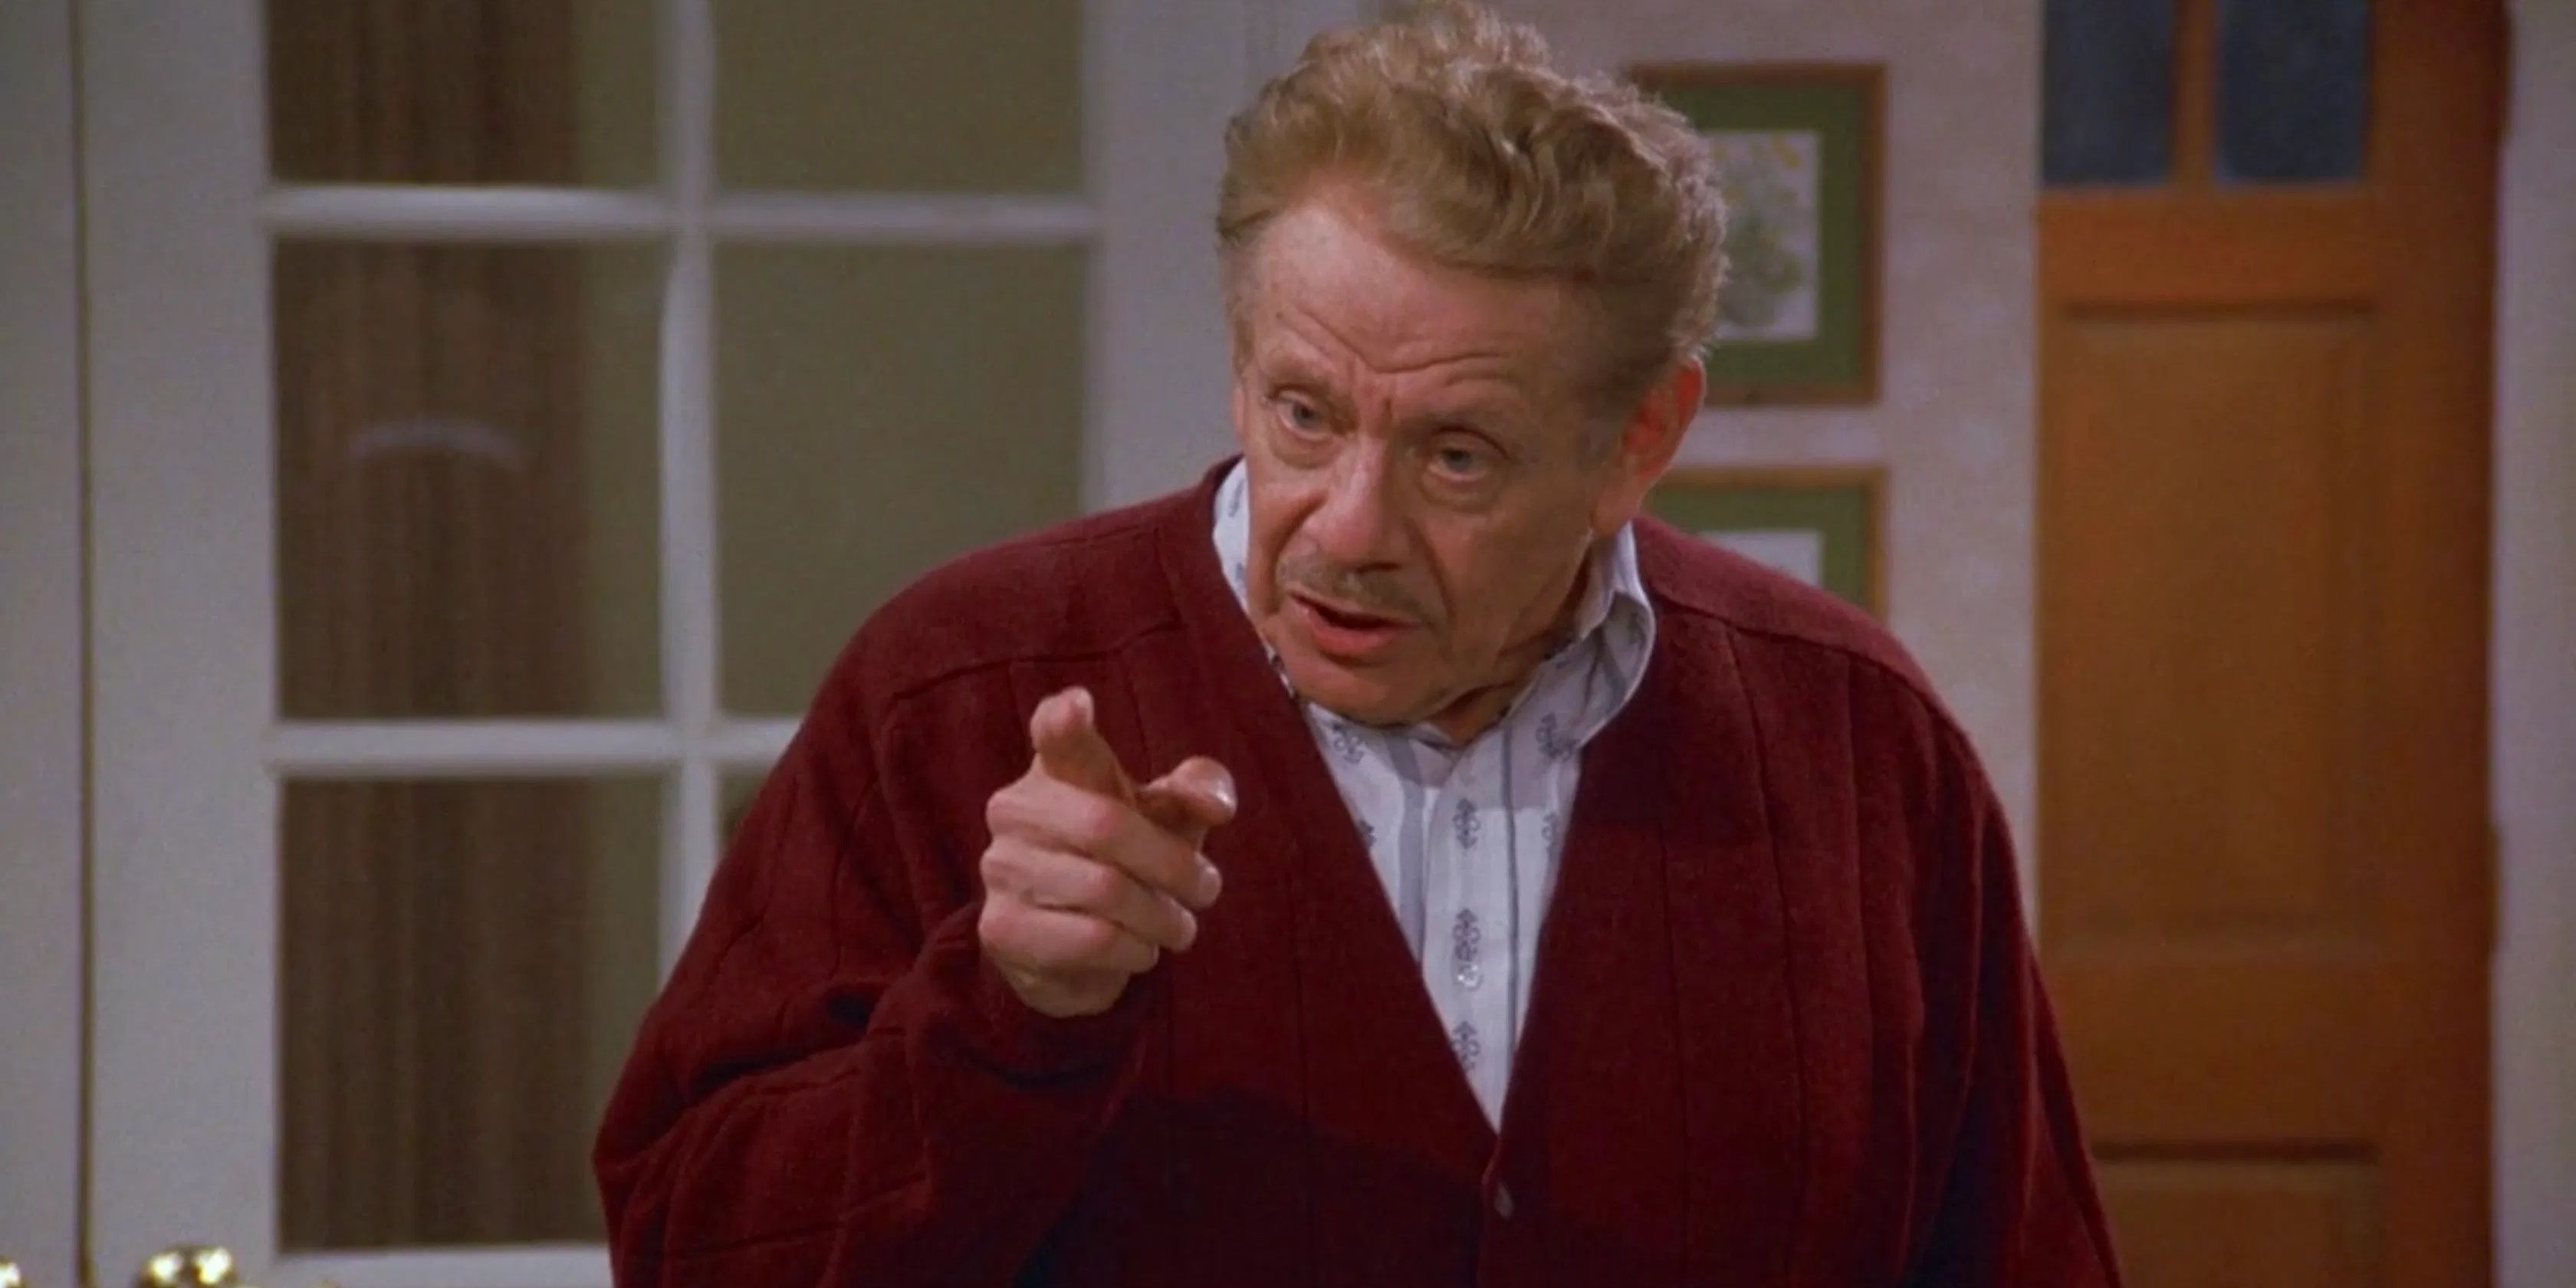 Frank Costanza talks sternly and points his finger in Seinfeld.